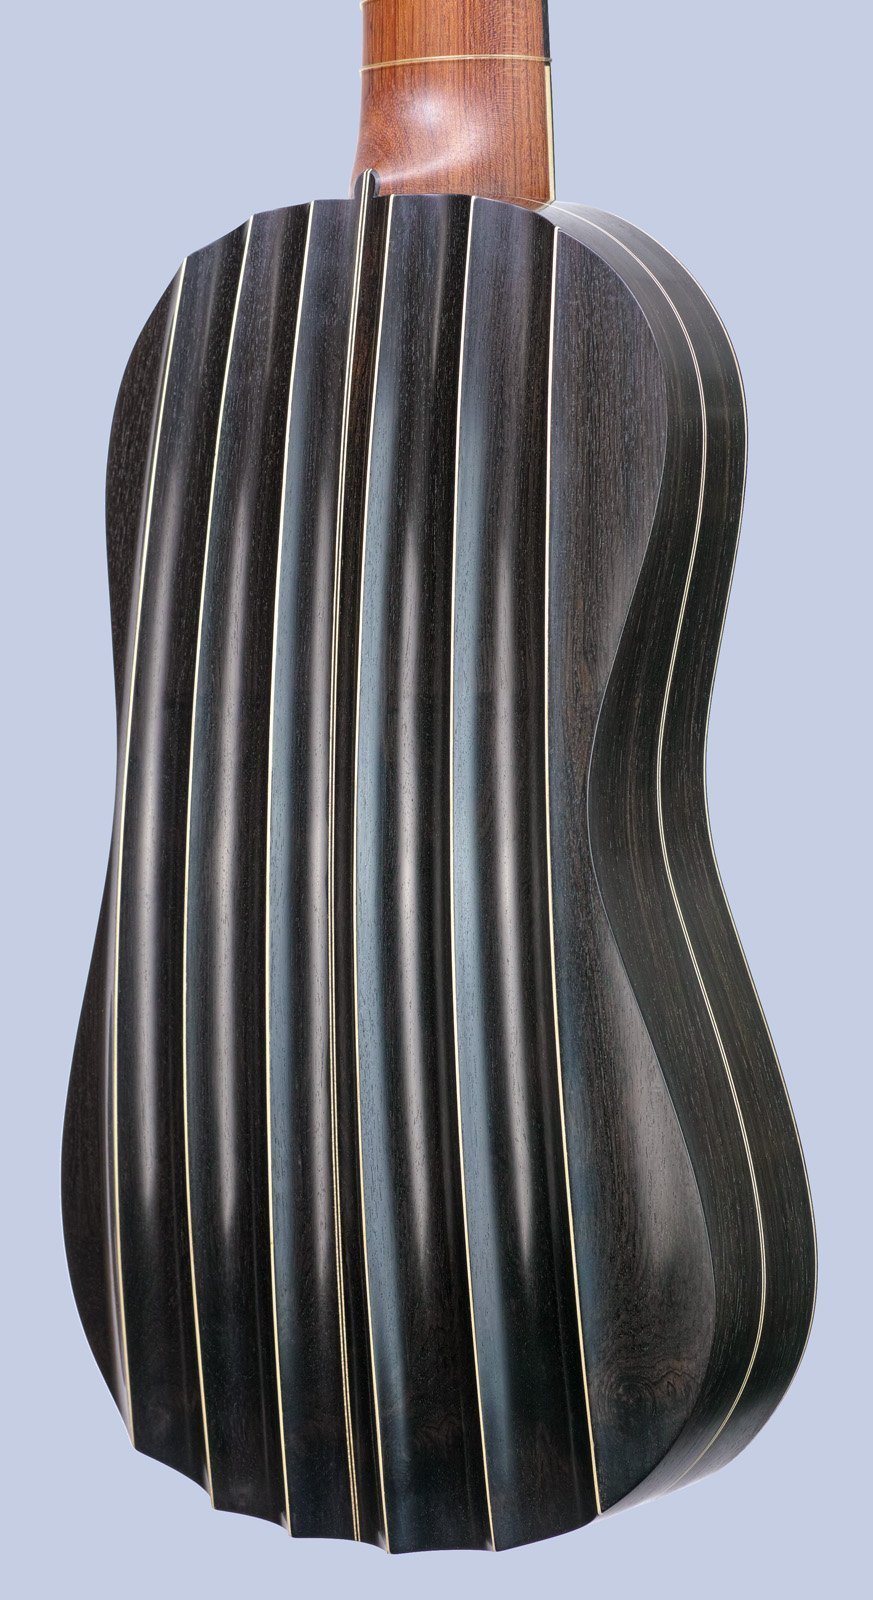 Fluted-back Dias model vihuela with African blackwood ribs rear body view in perspective